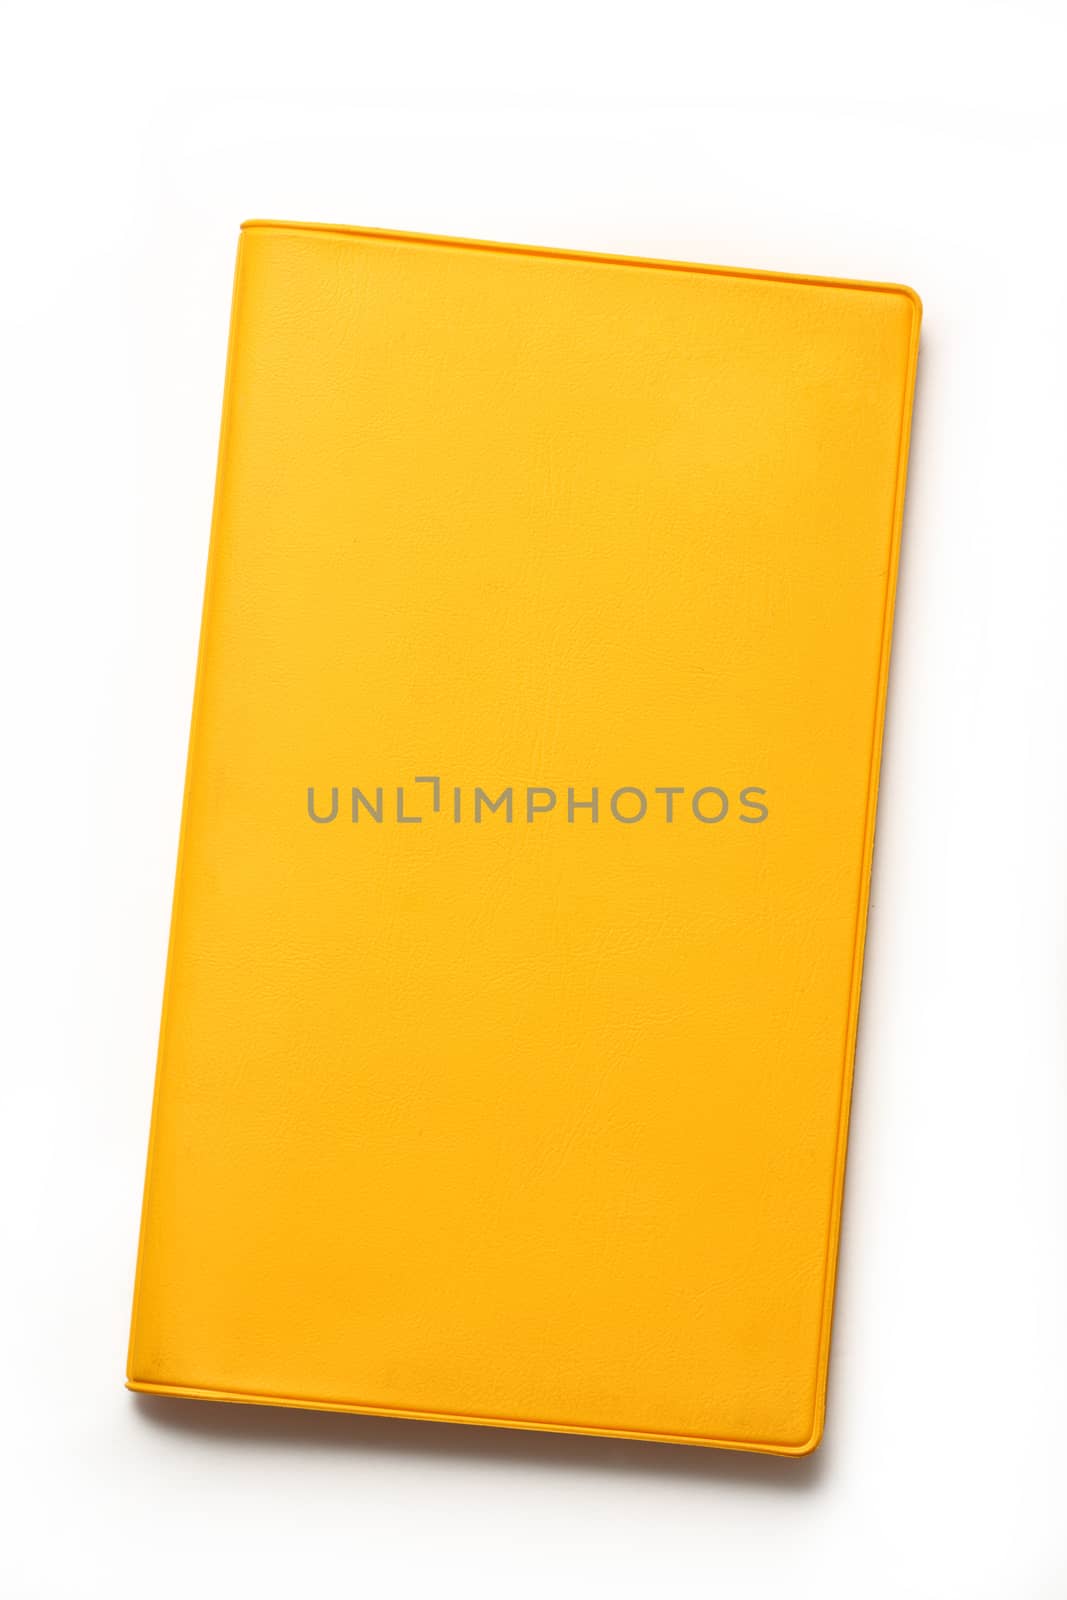 Yellow blank book on white